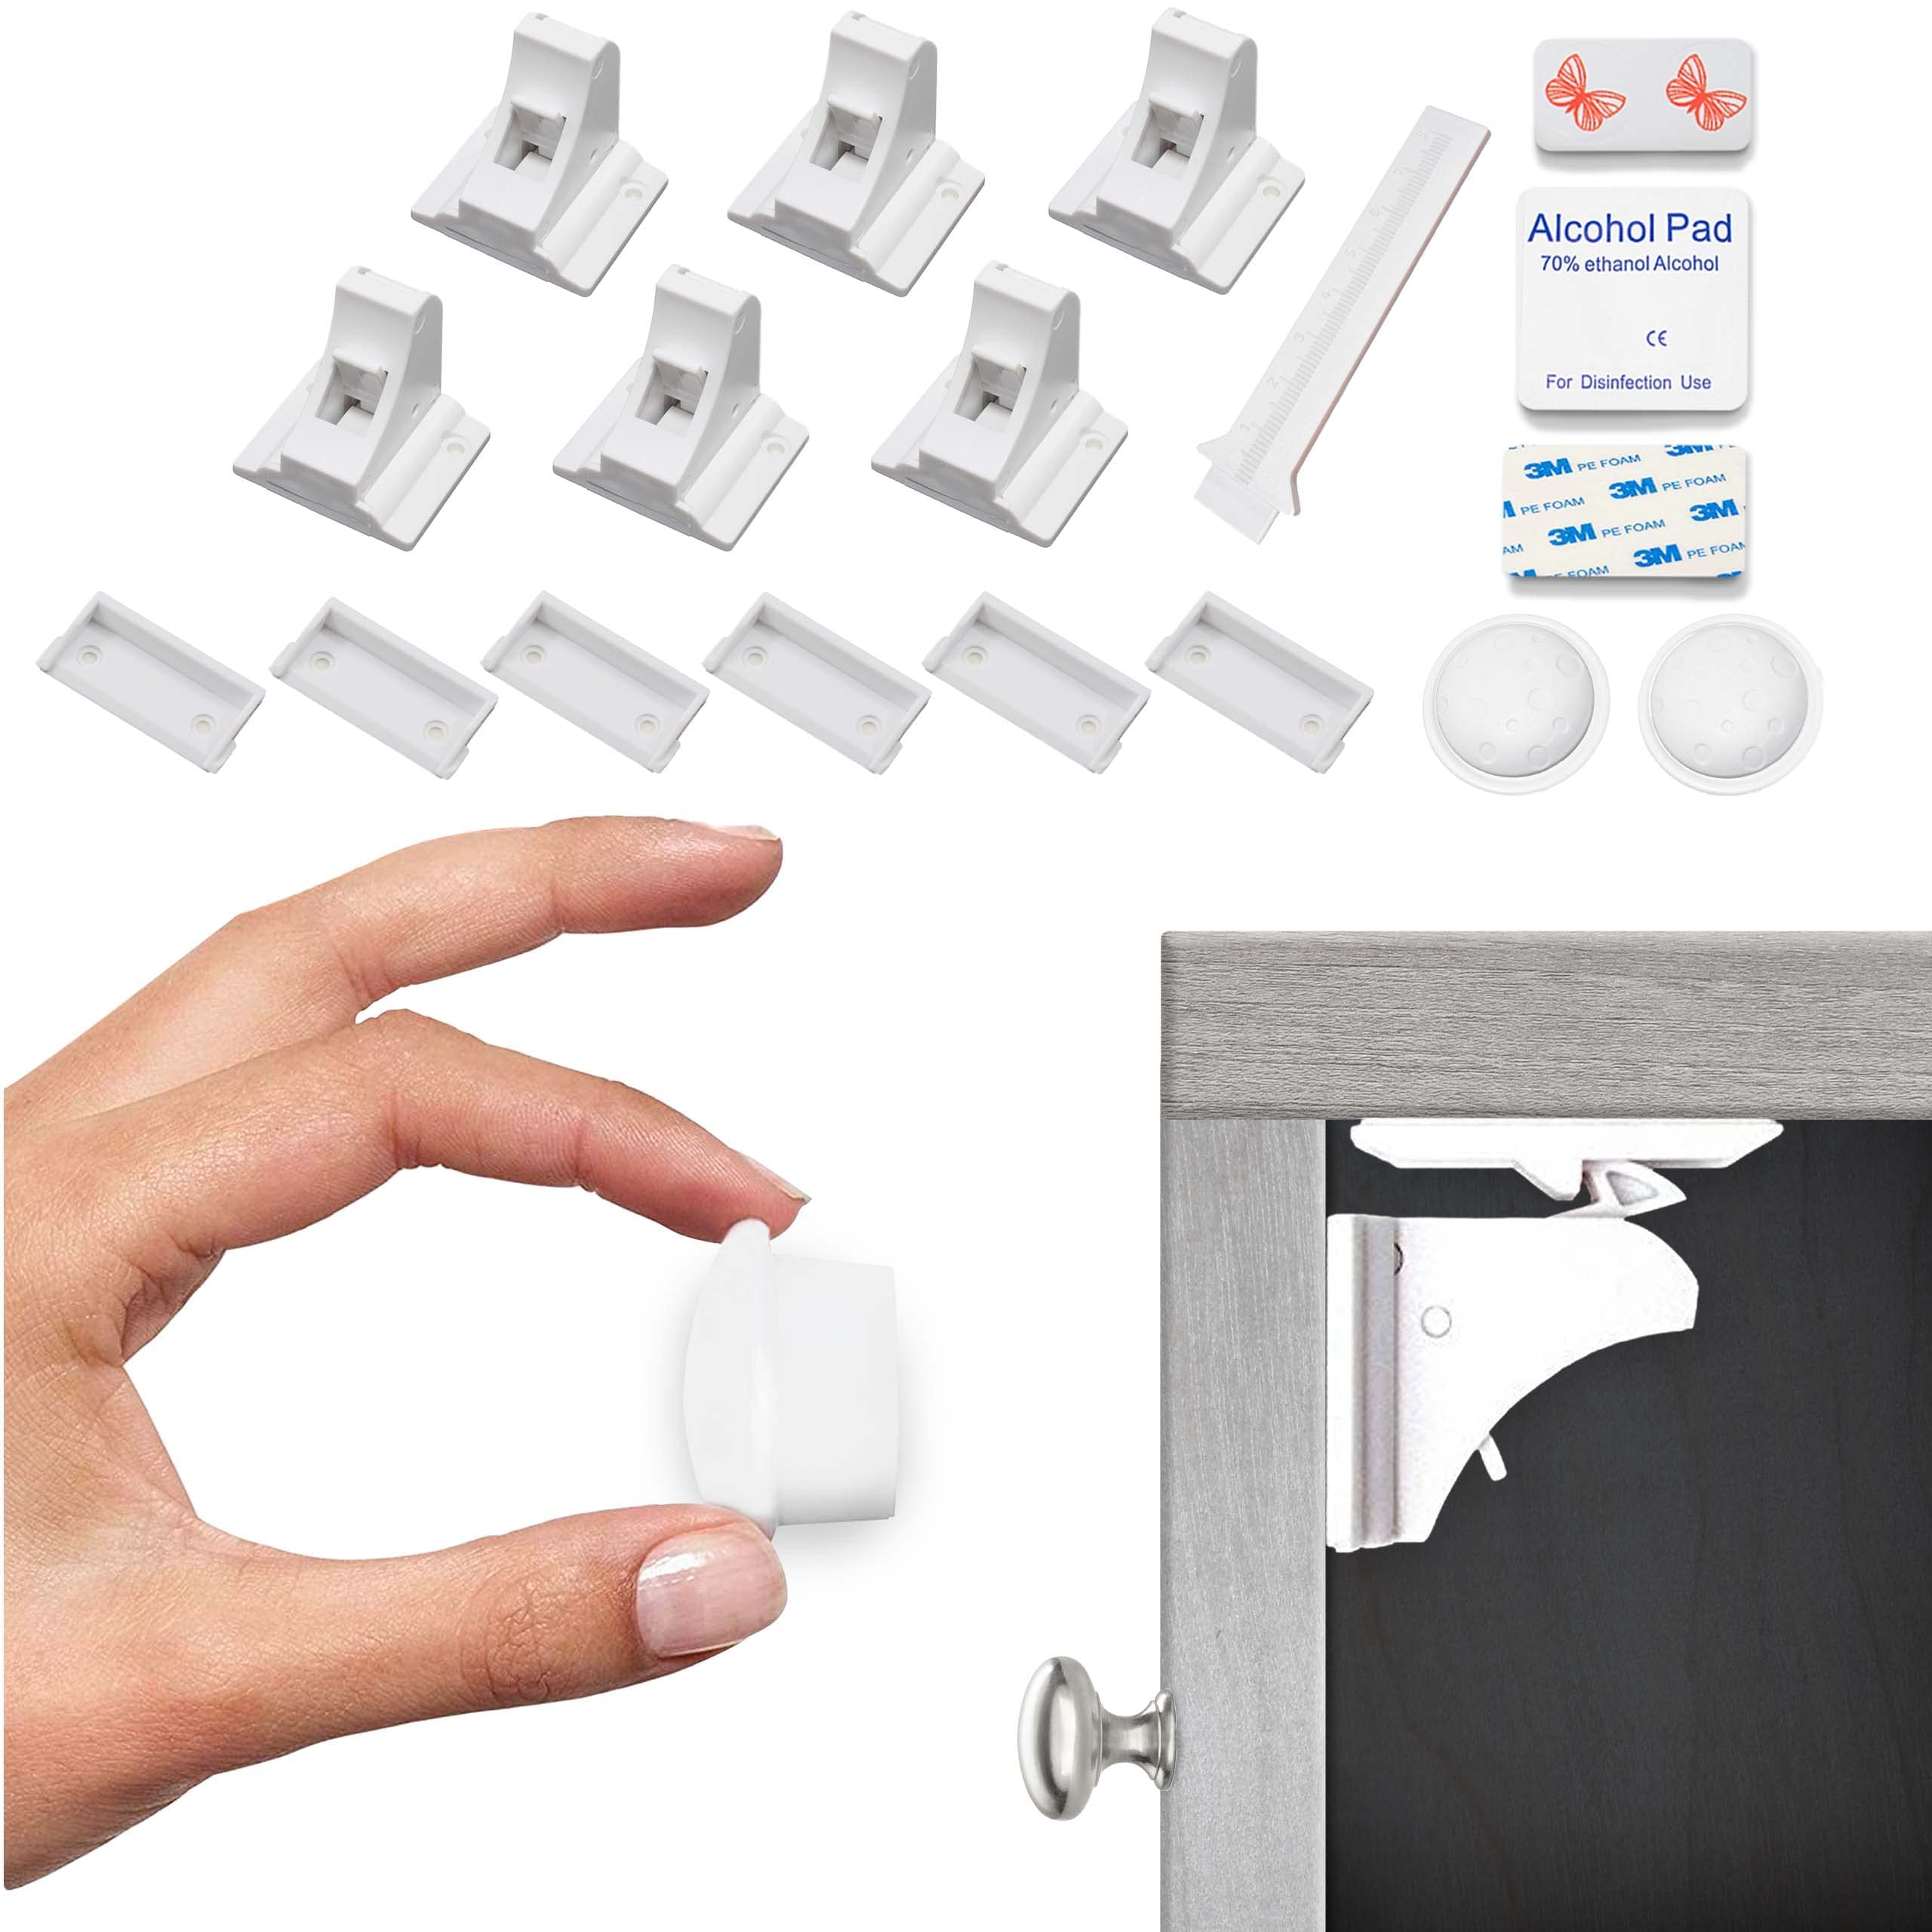 Eco-Baby Cabinet Locks for Babies -Baby Proofing Safety Latches (6